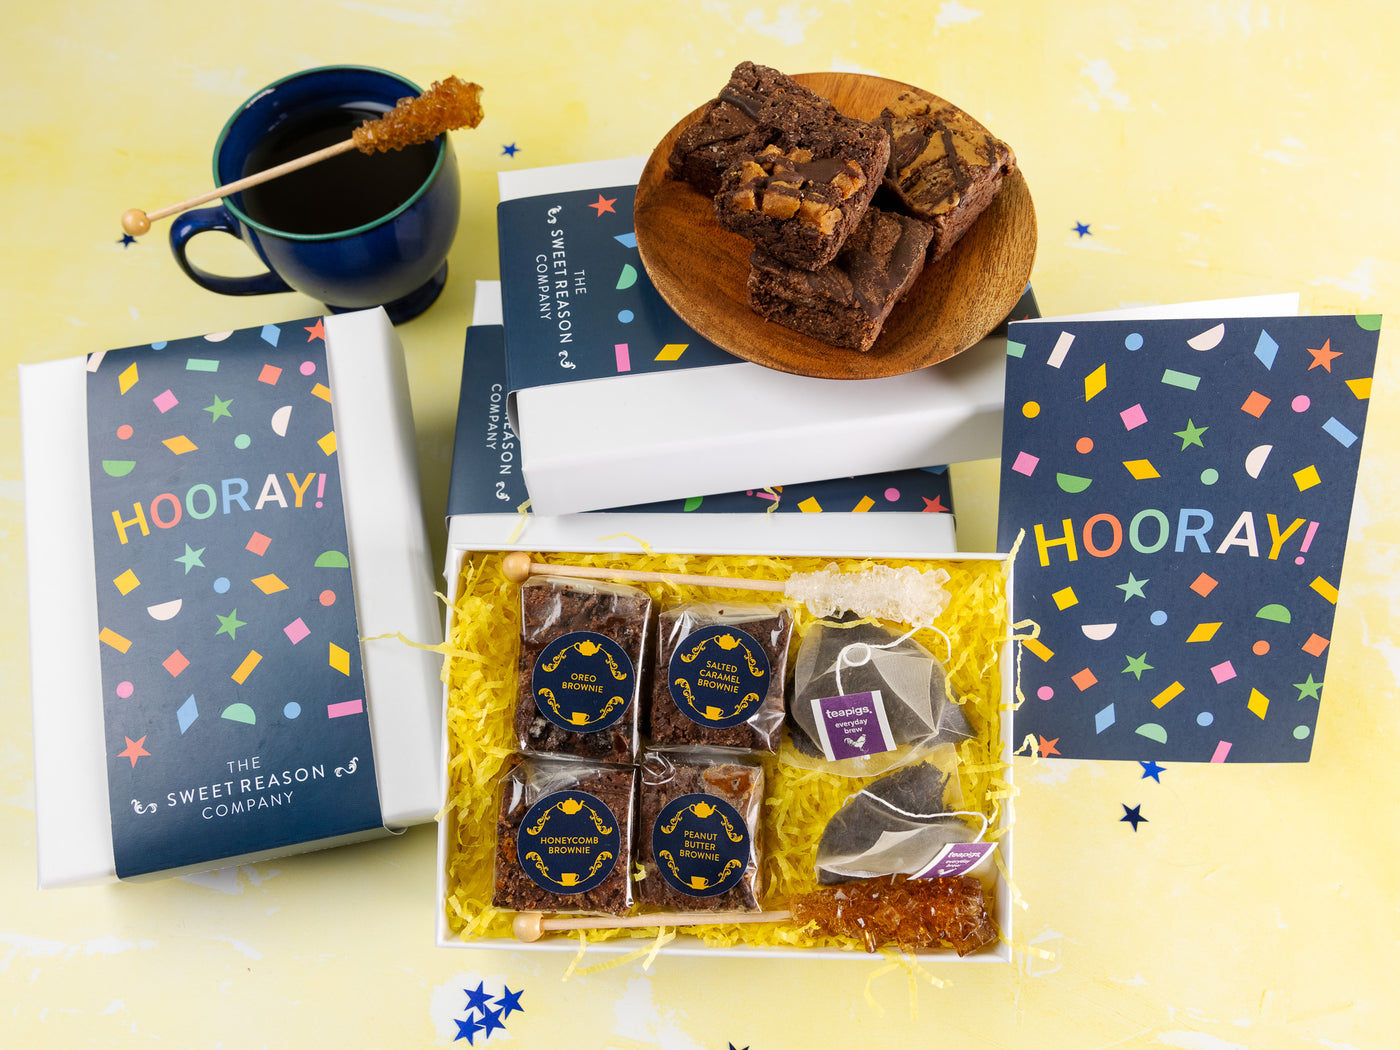 'Hooray!' Gluten Free Afternoon Tea For Two Gift